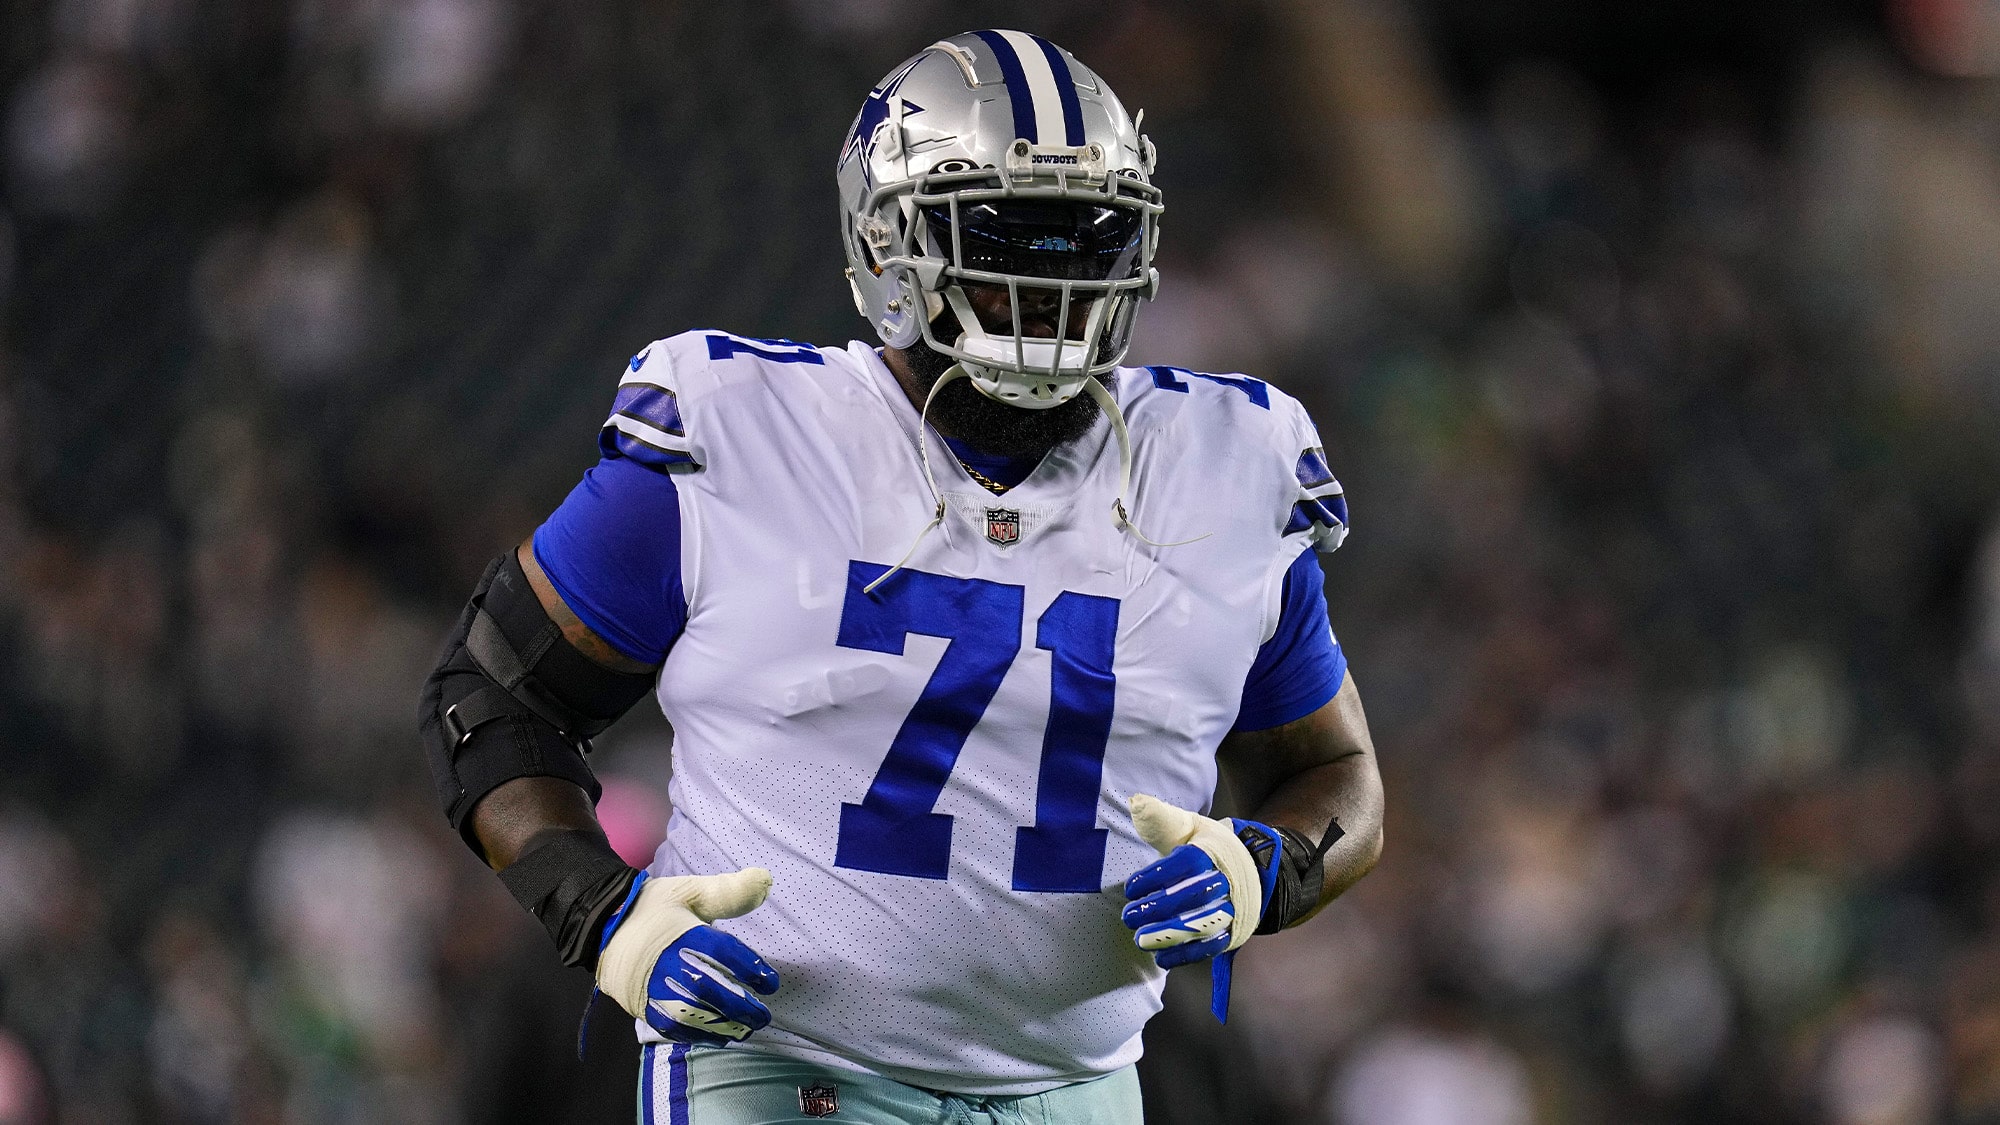 Jason Peters To Cowboys? Dallas Cowboys Rumors On Signing The Veteran OT  NFL Free Agent In 2022 